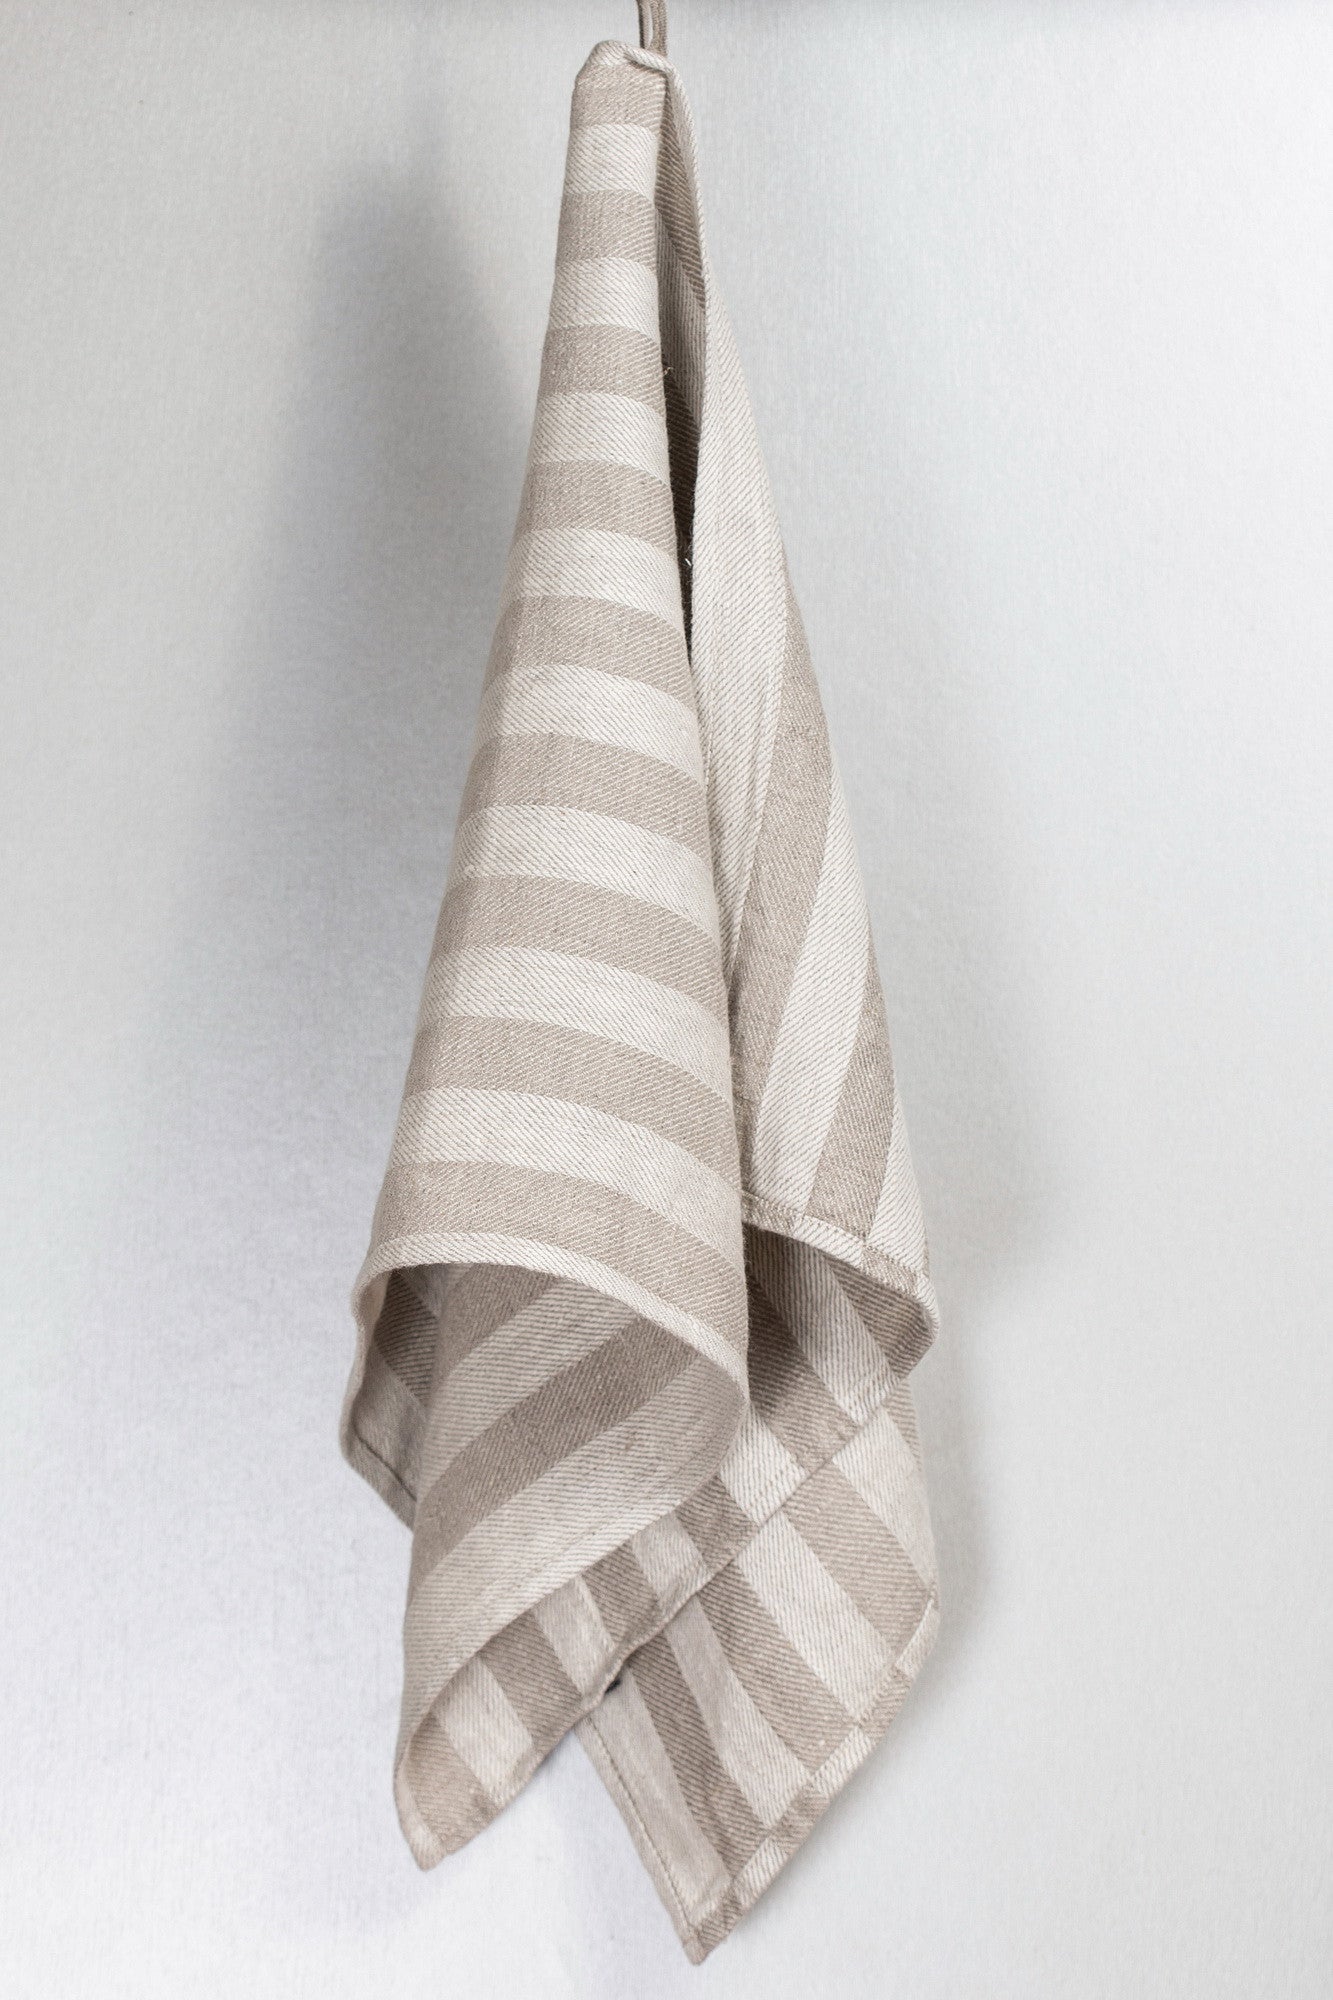 BLESS LINEN Jacquard Striped Pure Linen Flax Bath Towel, Grey/White - BLESS LINEN pure linen towels and blankets - 6